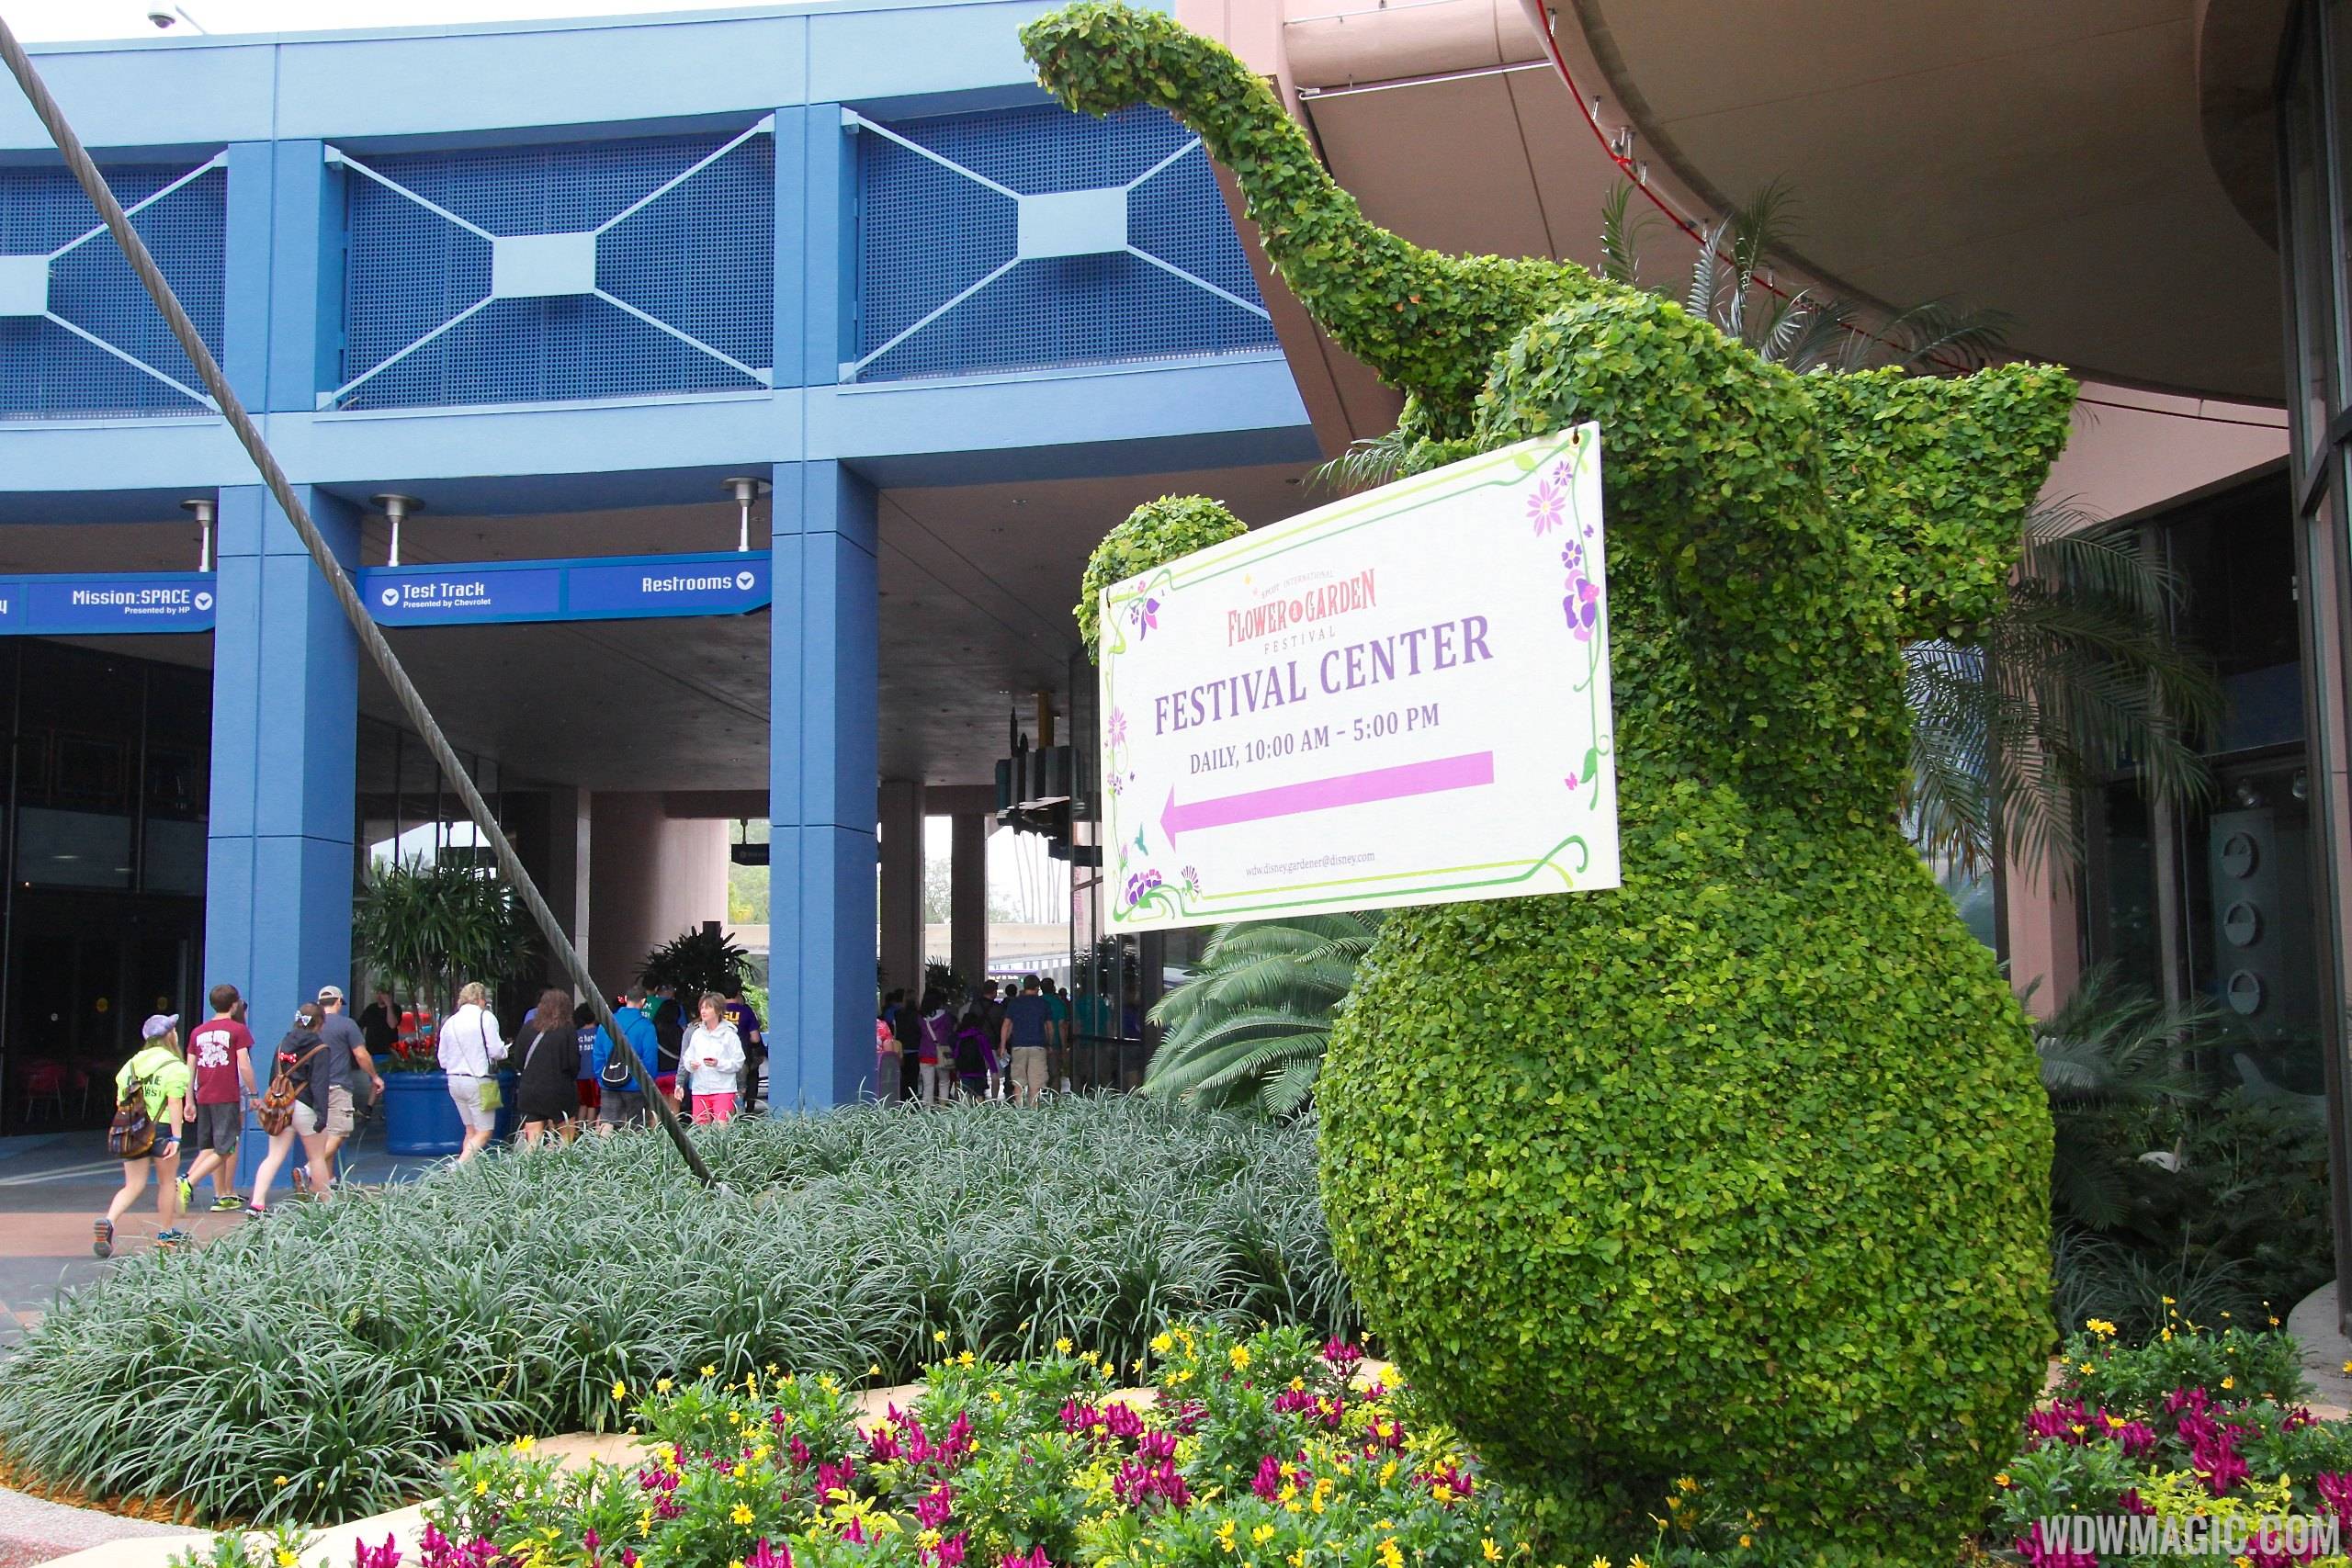 2014 Epcot Flower and Garden Festival - Elephant topiary